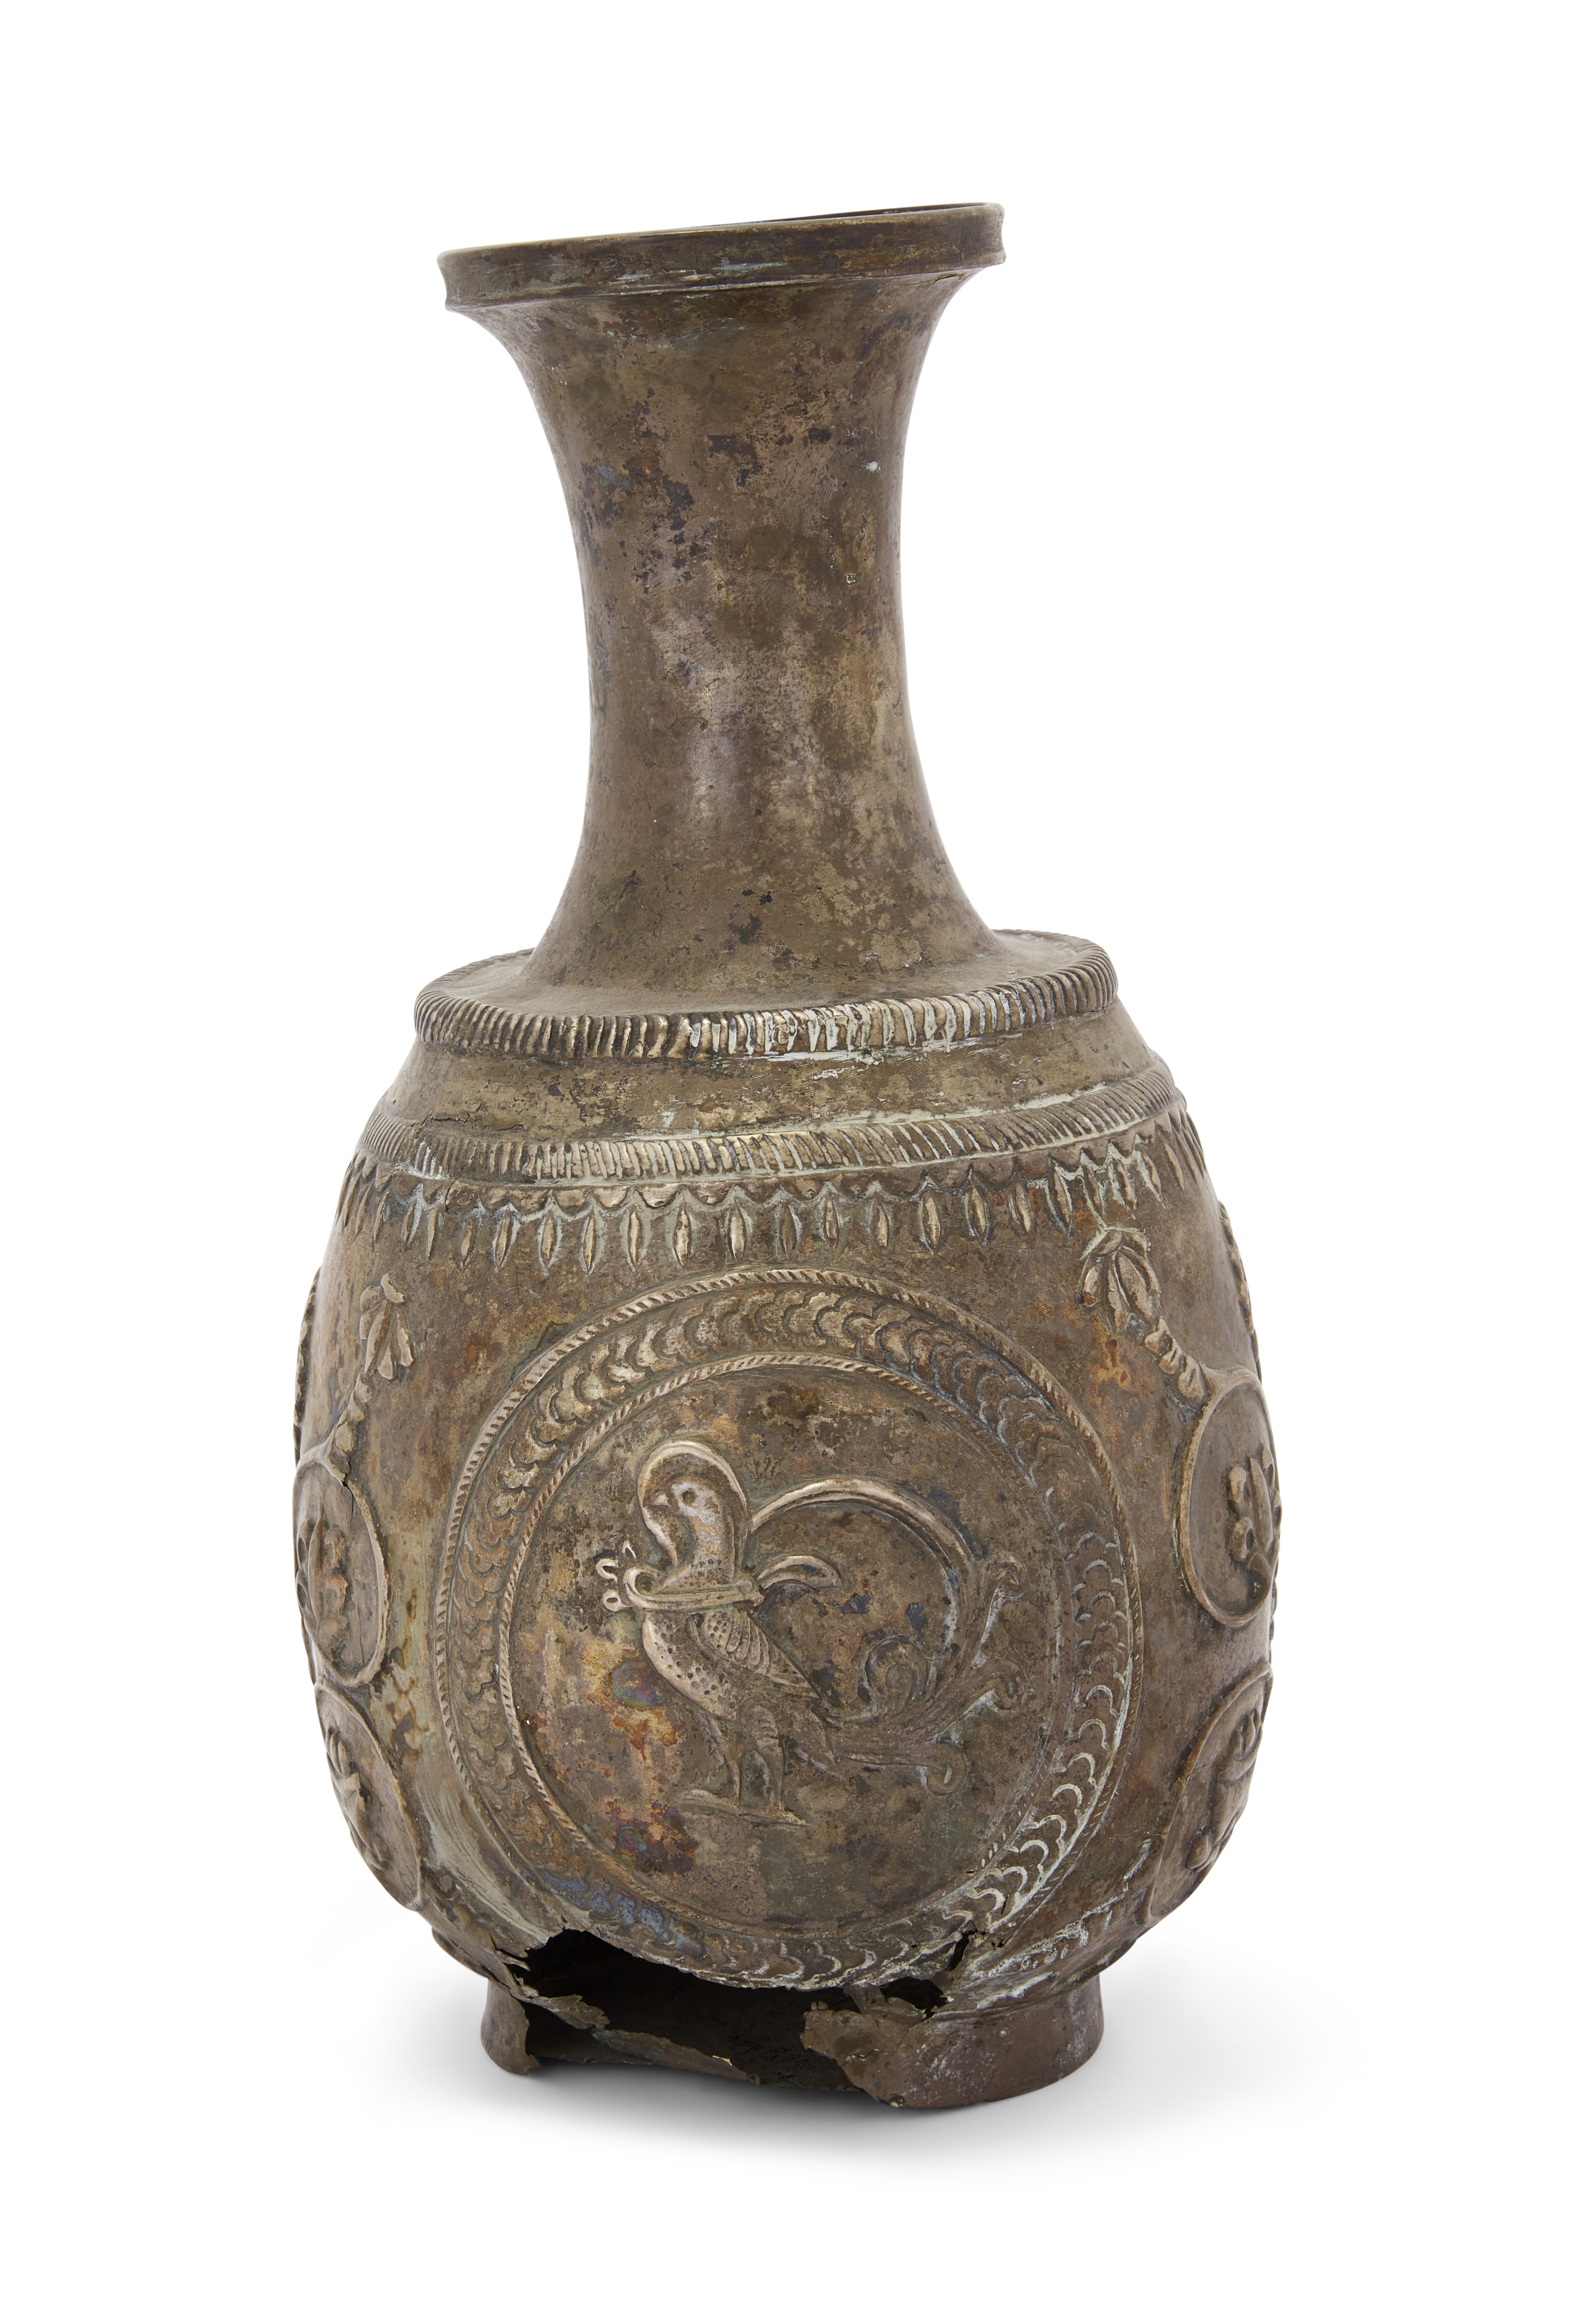 Property from An Important Private Collection To Be Sold With No Reserve A Sasanian-style silve... - Image 2 of 2